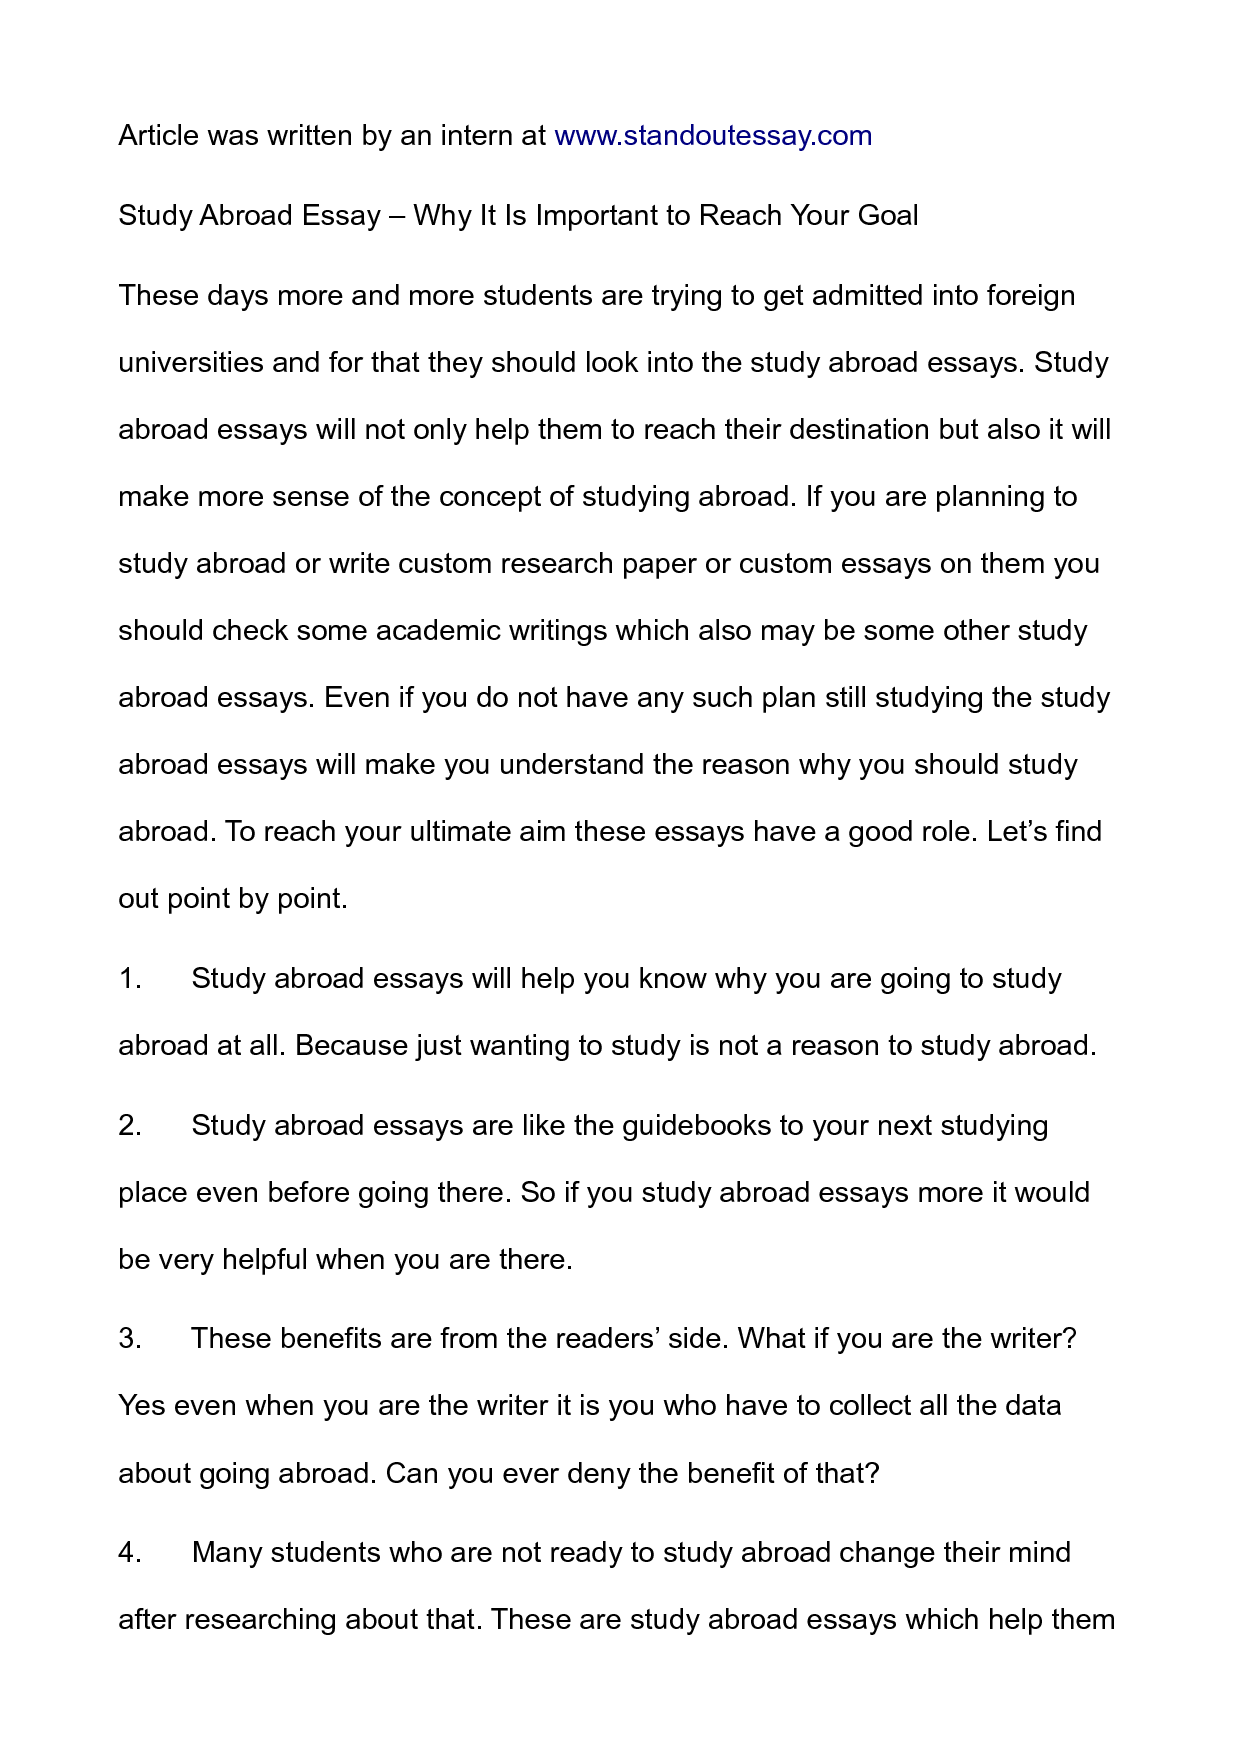 Why Study Abroad Essay Examples Image